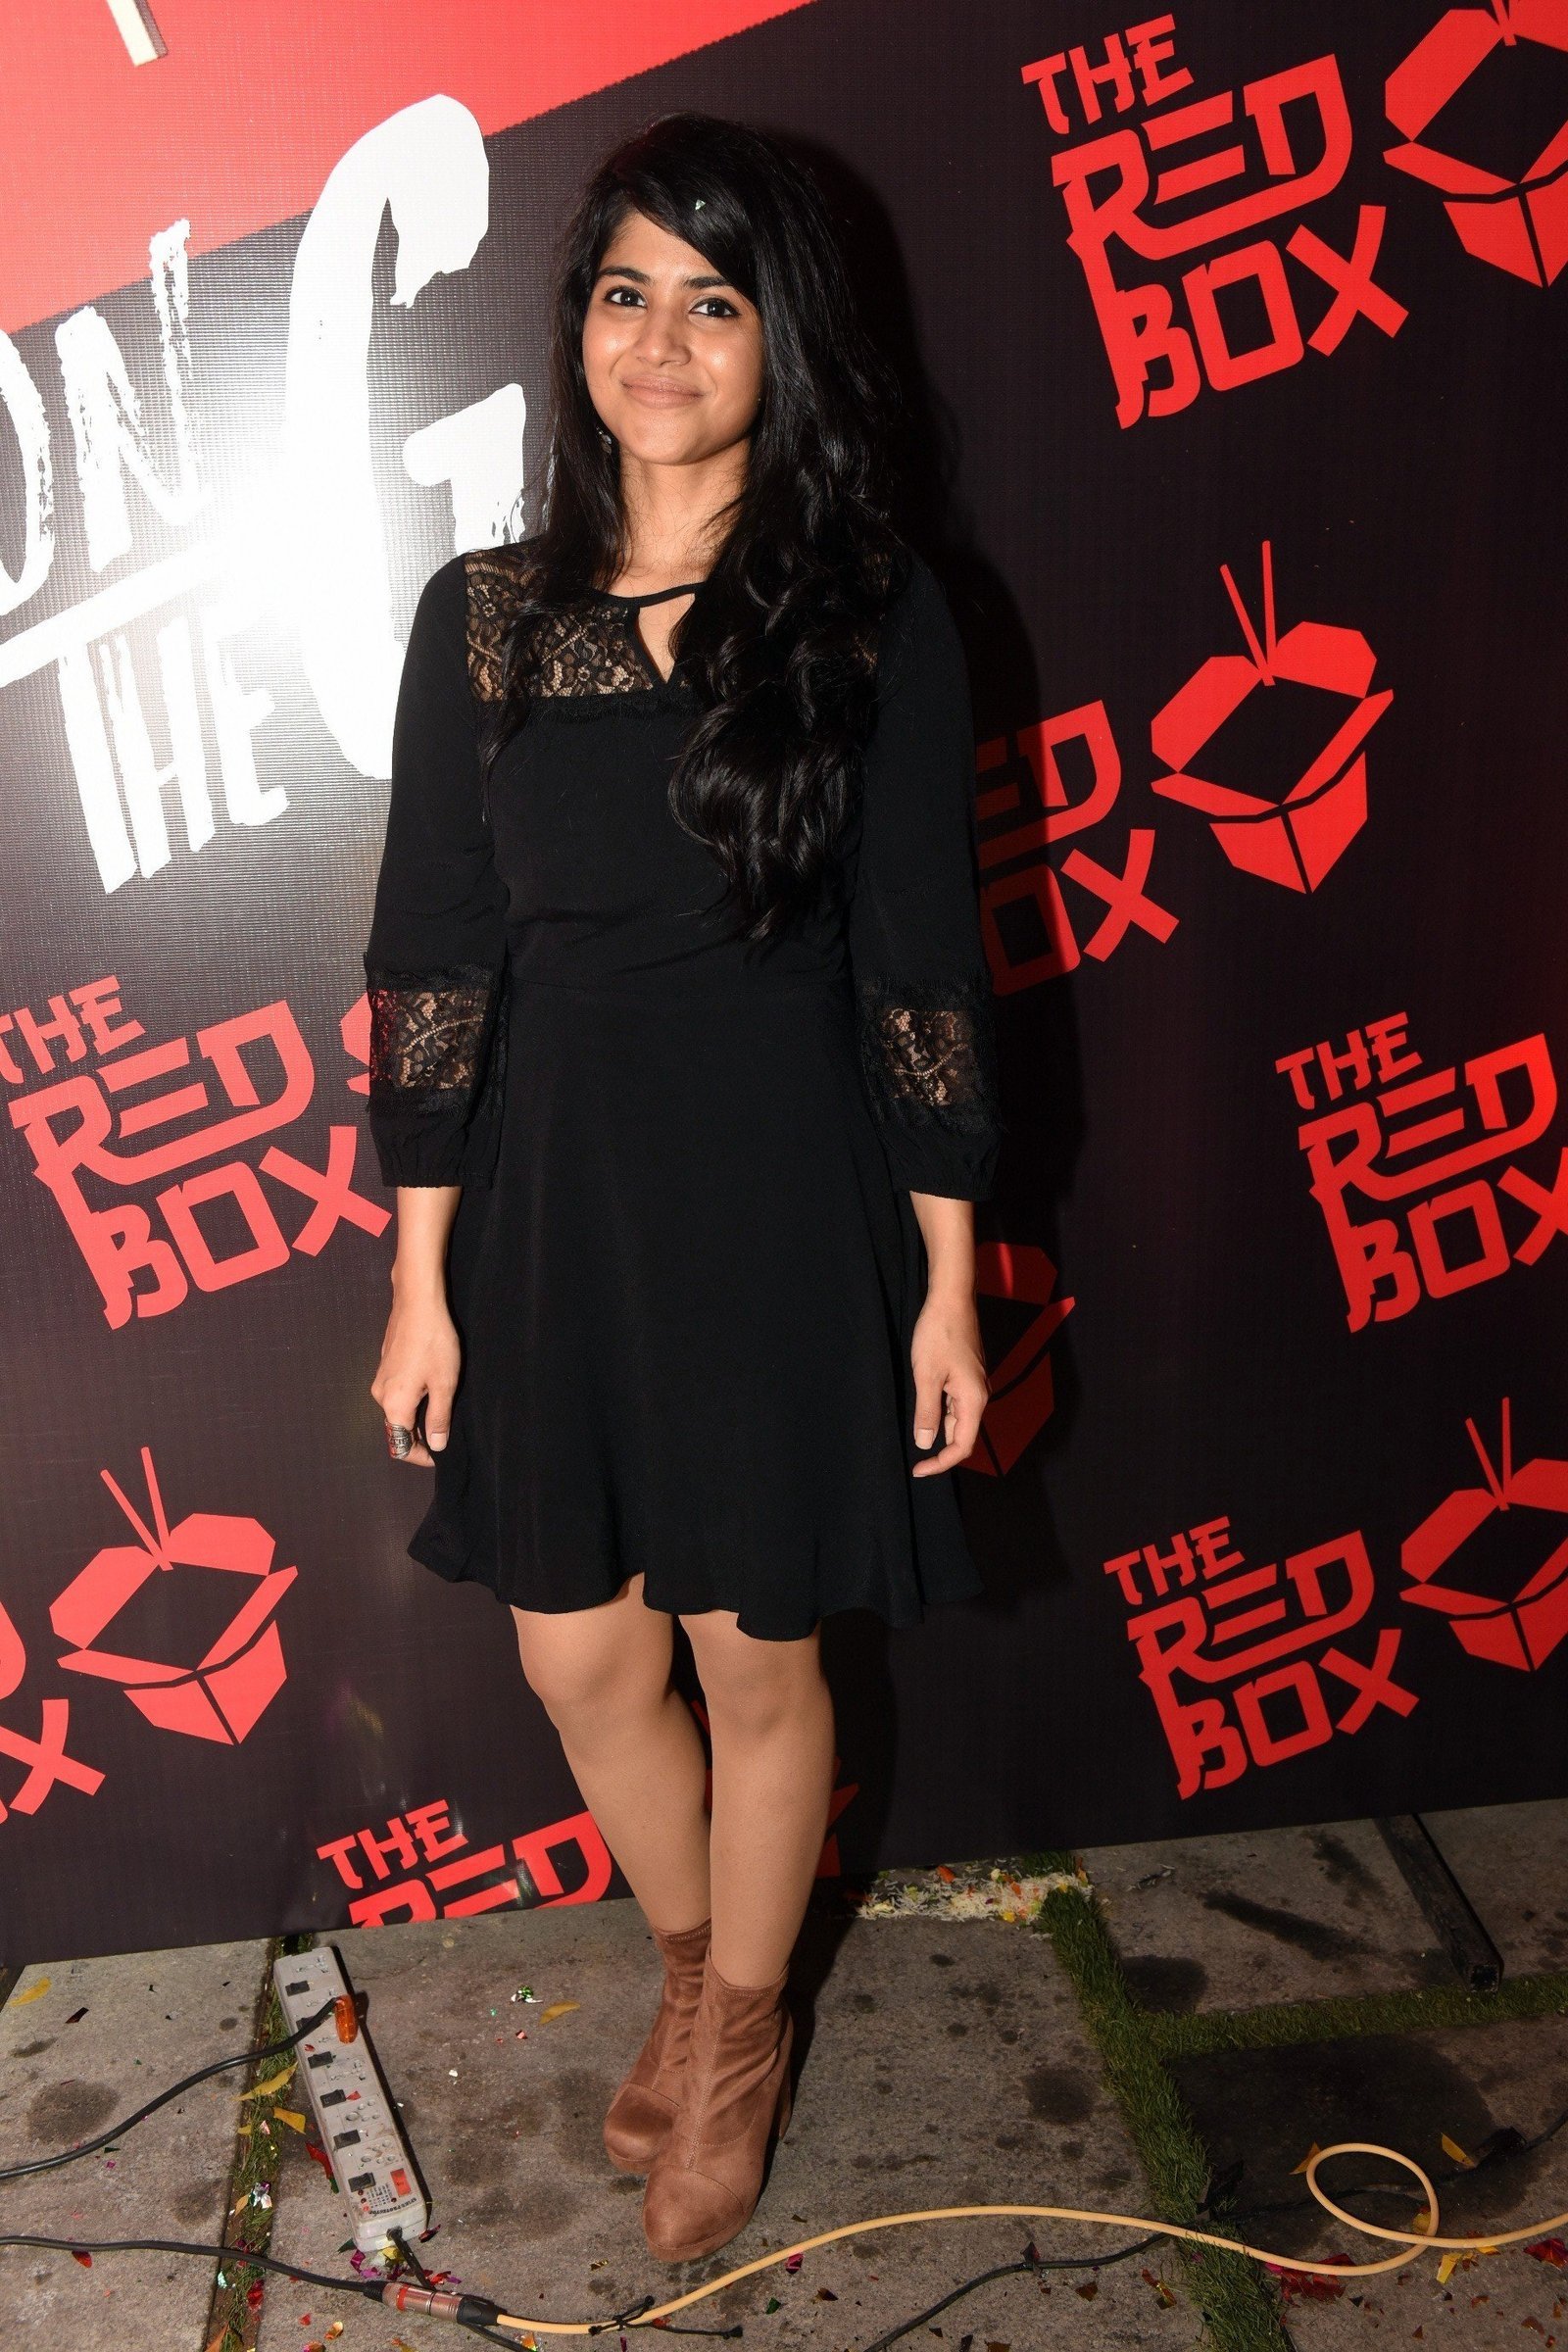 Actress Megha Akash Launches Soups And Momos At The Red Box Photos | Picture 1479756